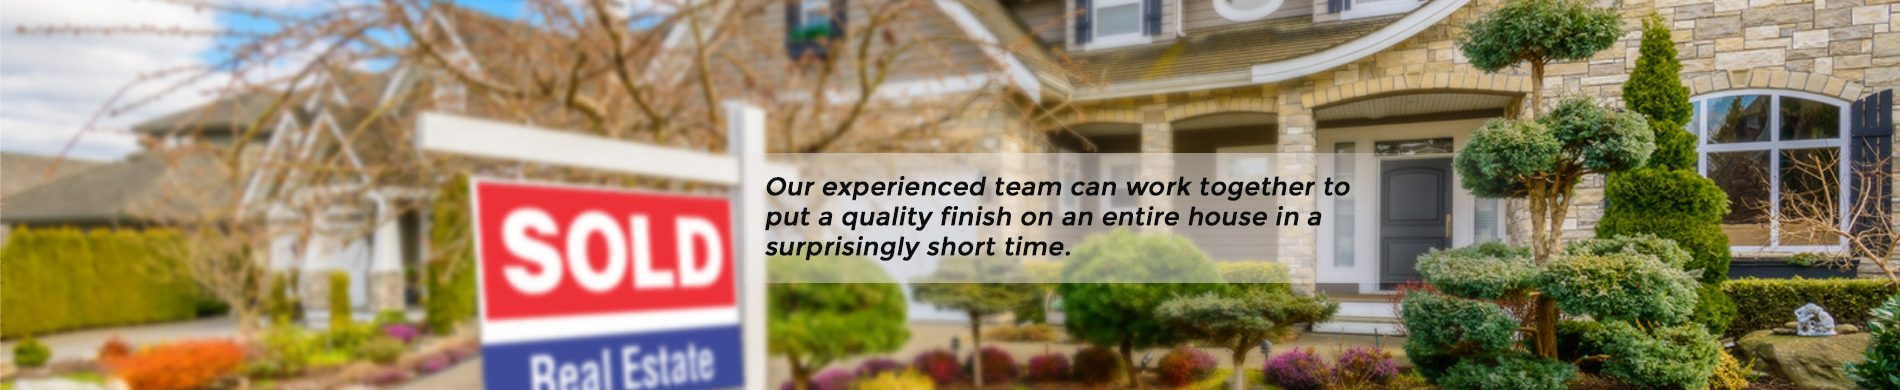 Our experienced team can work together to put a quality finish on an entire house in a surprisingly short time.